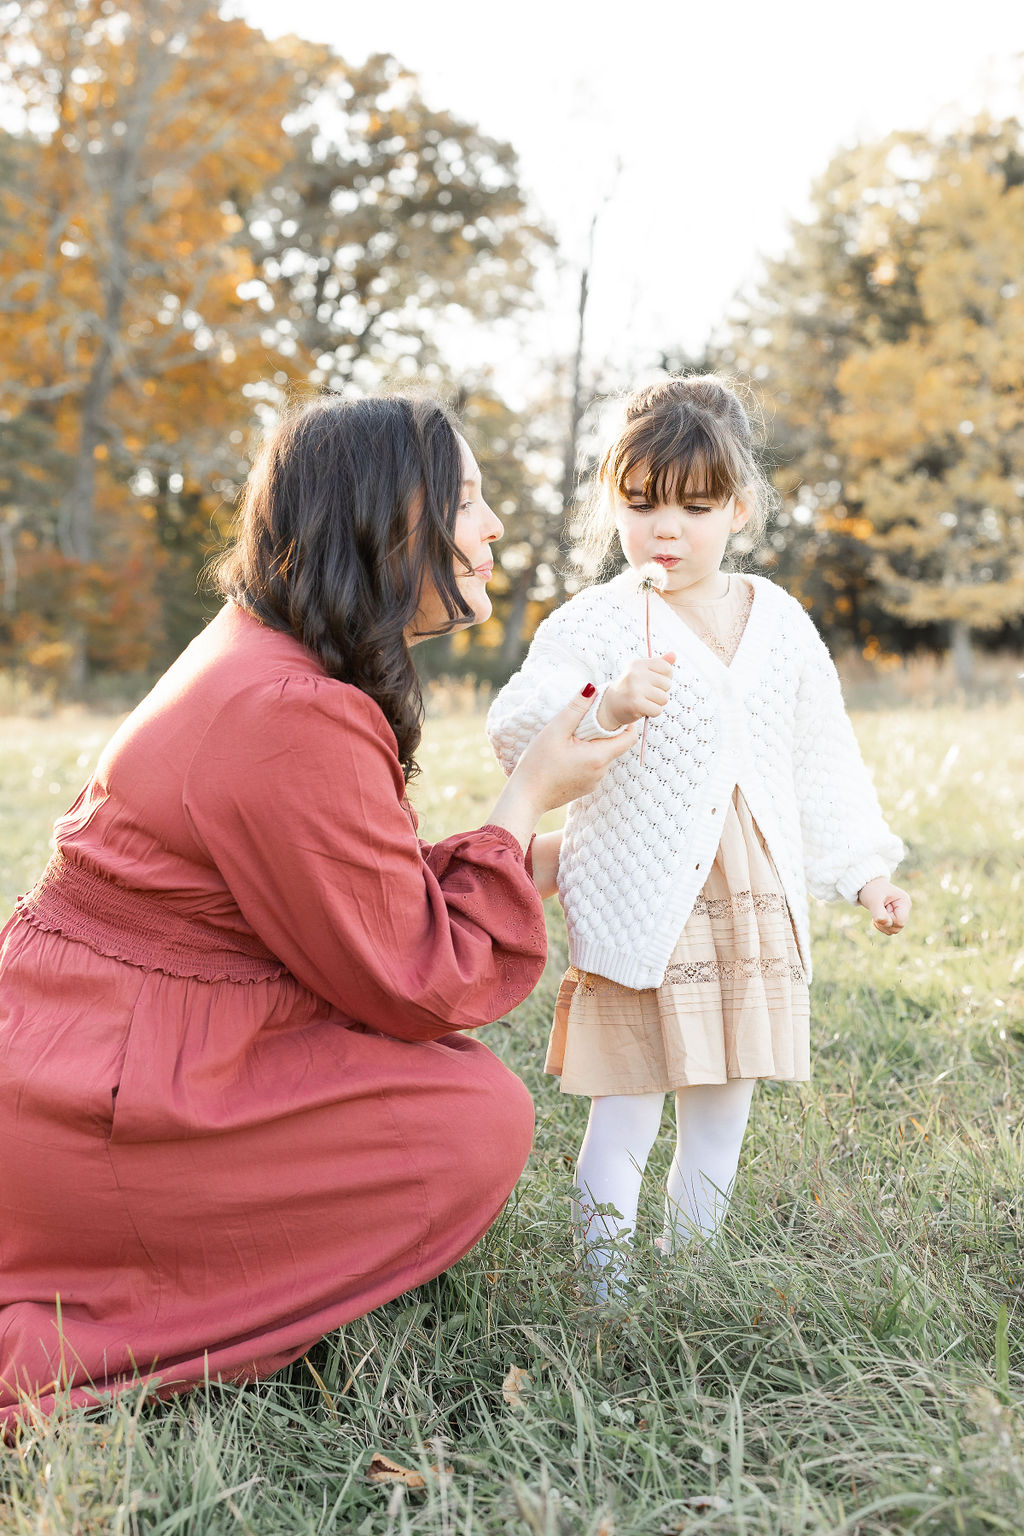 A mother in a red dress helps her young daughter blow a dandelion in a grassy field Women's Health Care Group Teaneck